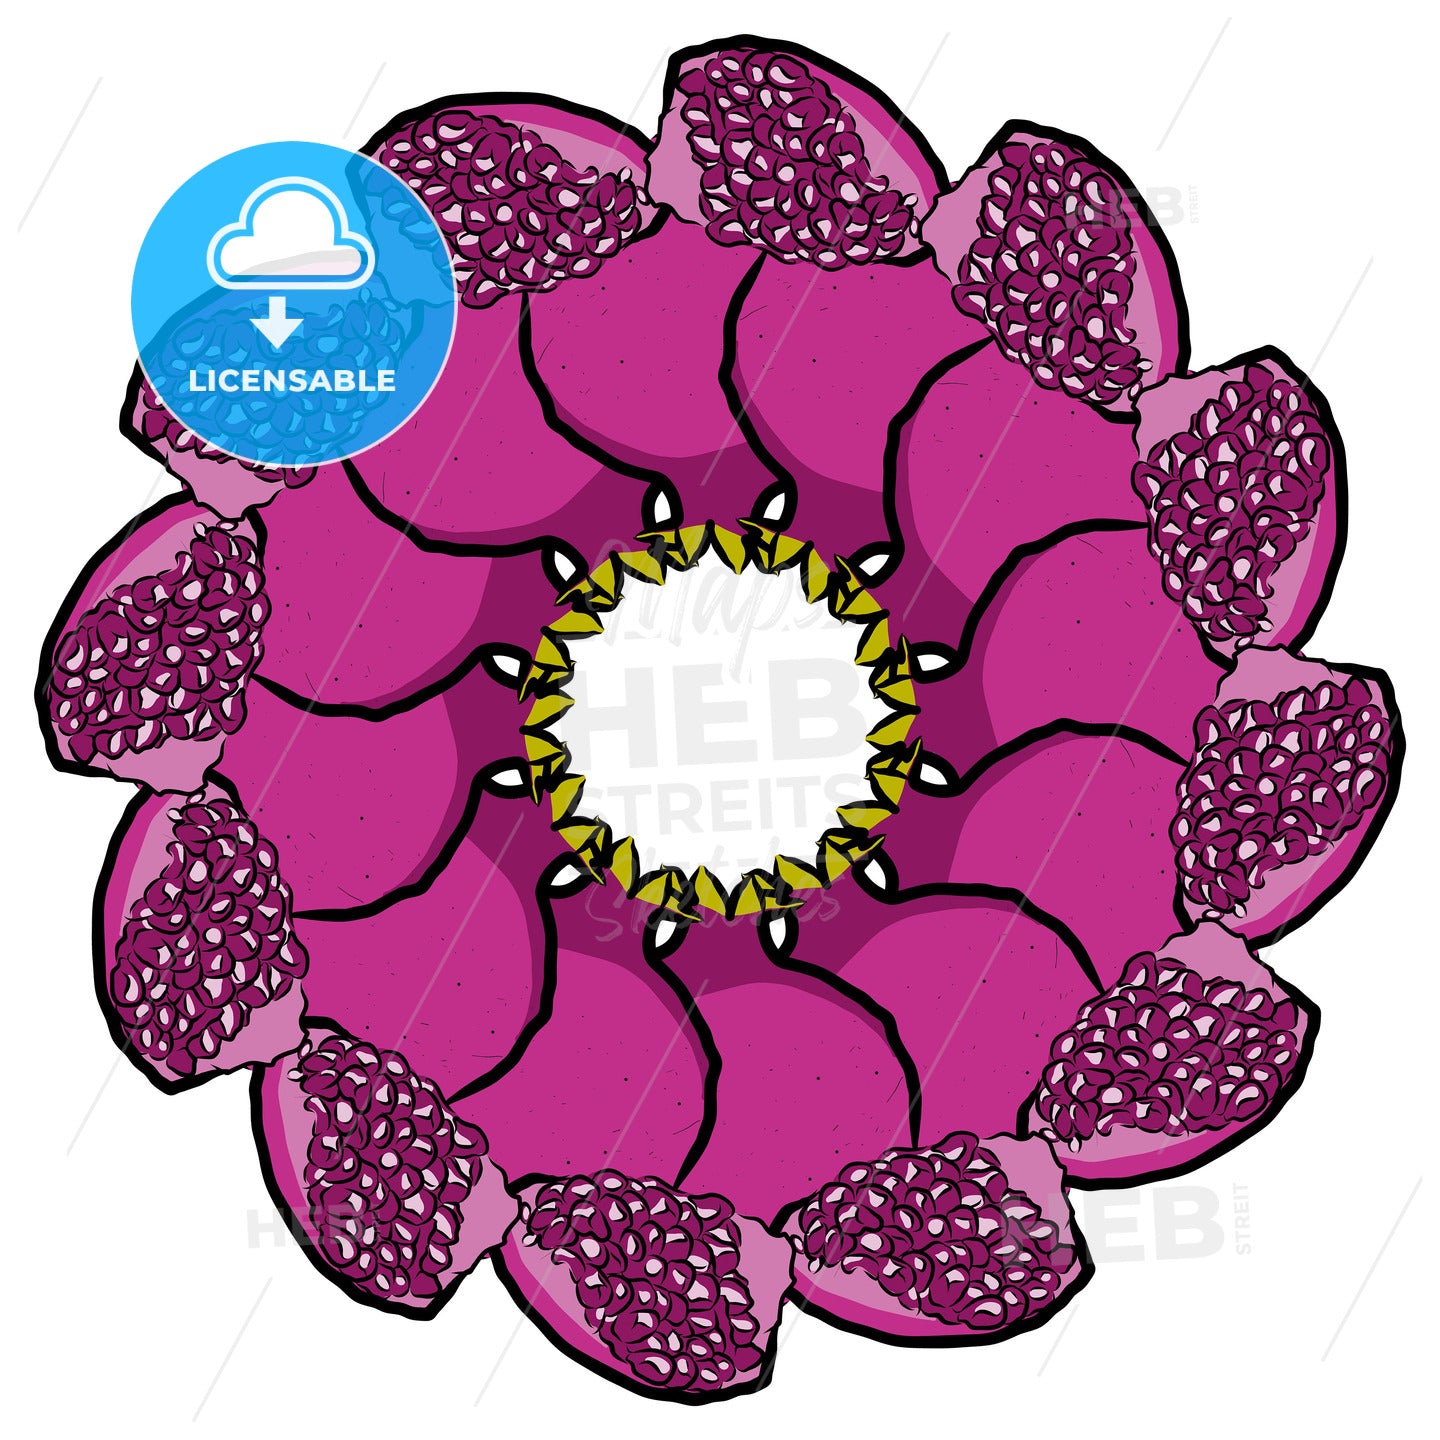 Many pomegranates arranged in a circle on white – instant download